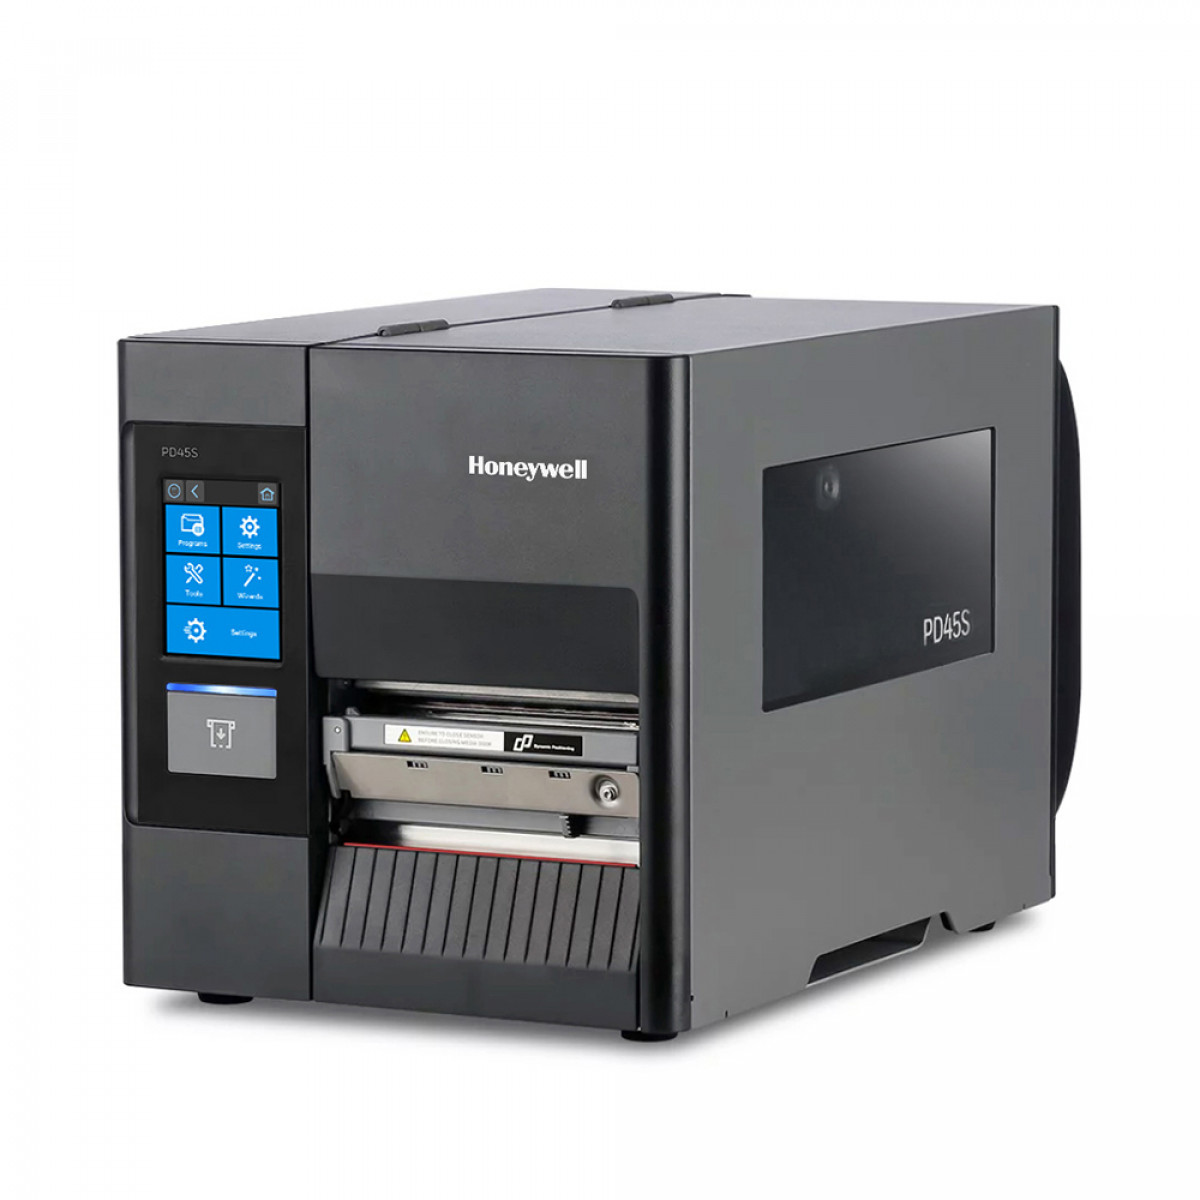 Honeywell PD45S for smart printing industrial applications